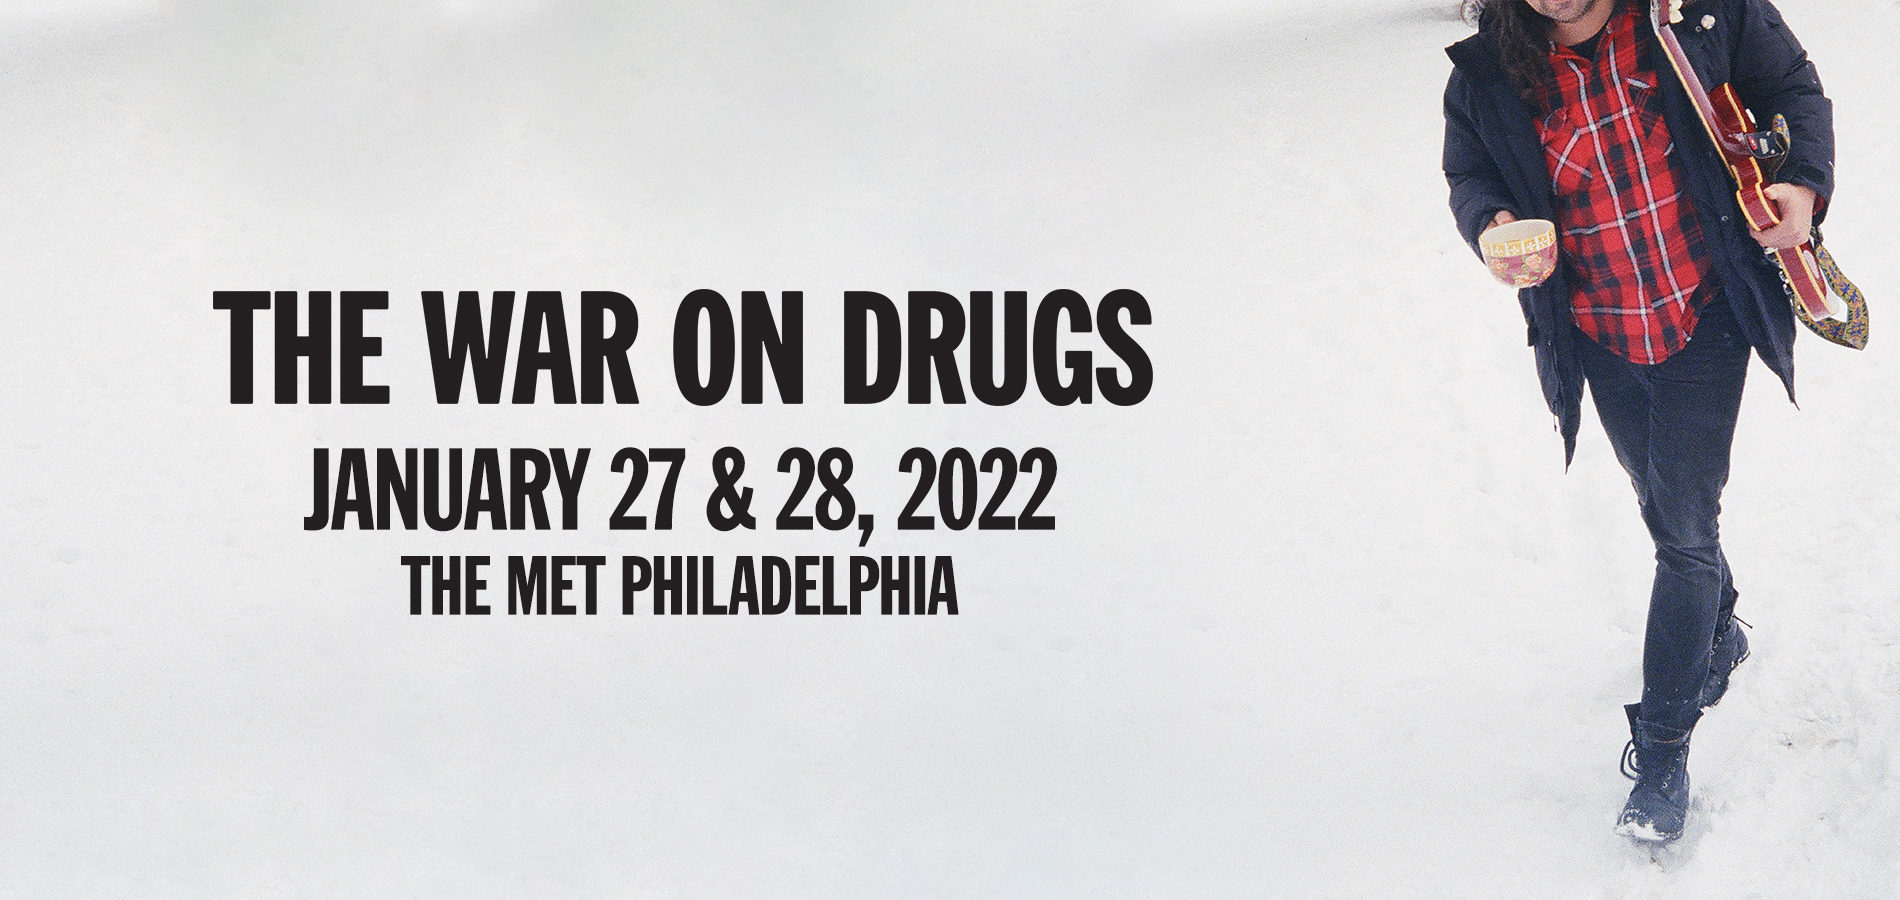 WXPN Welcomes The War On Drugs